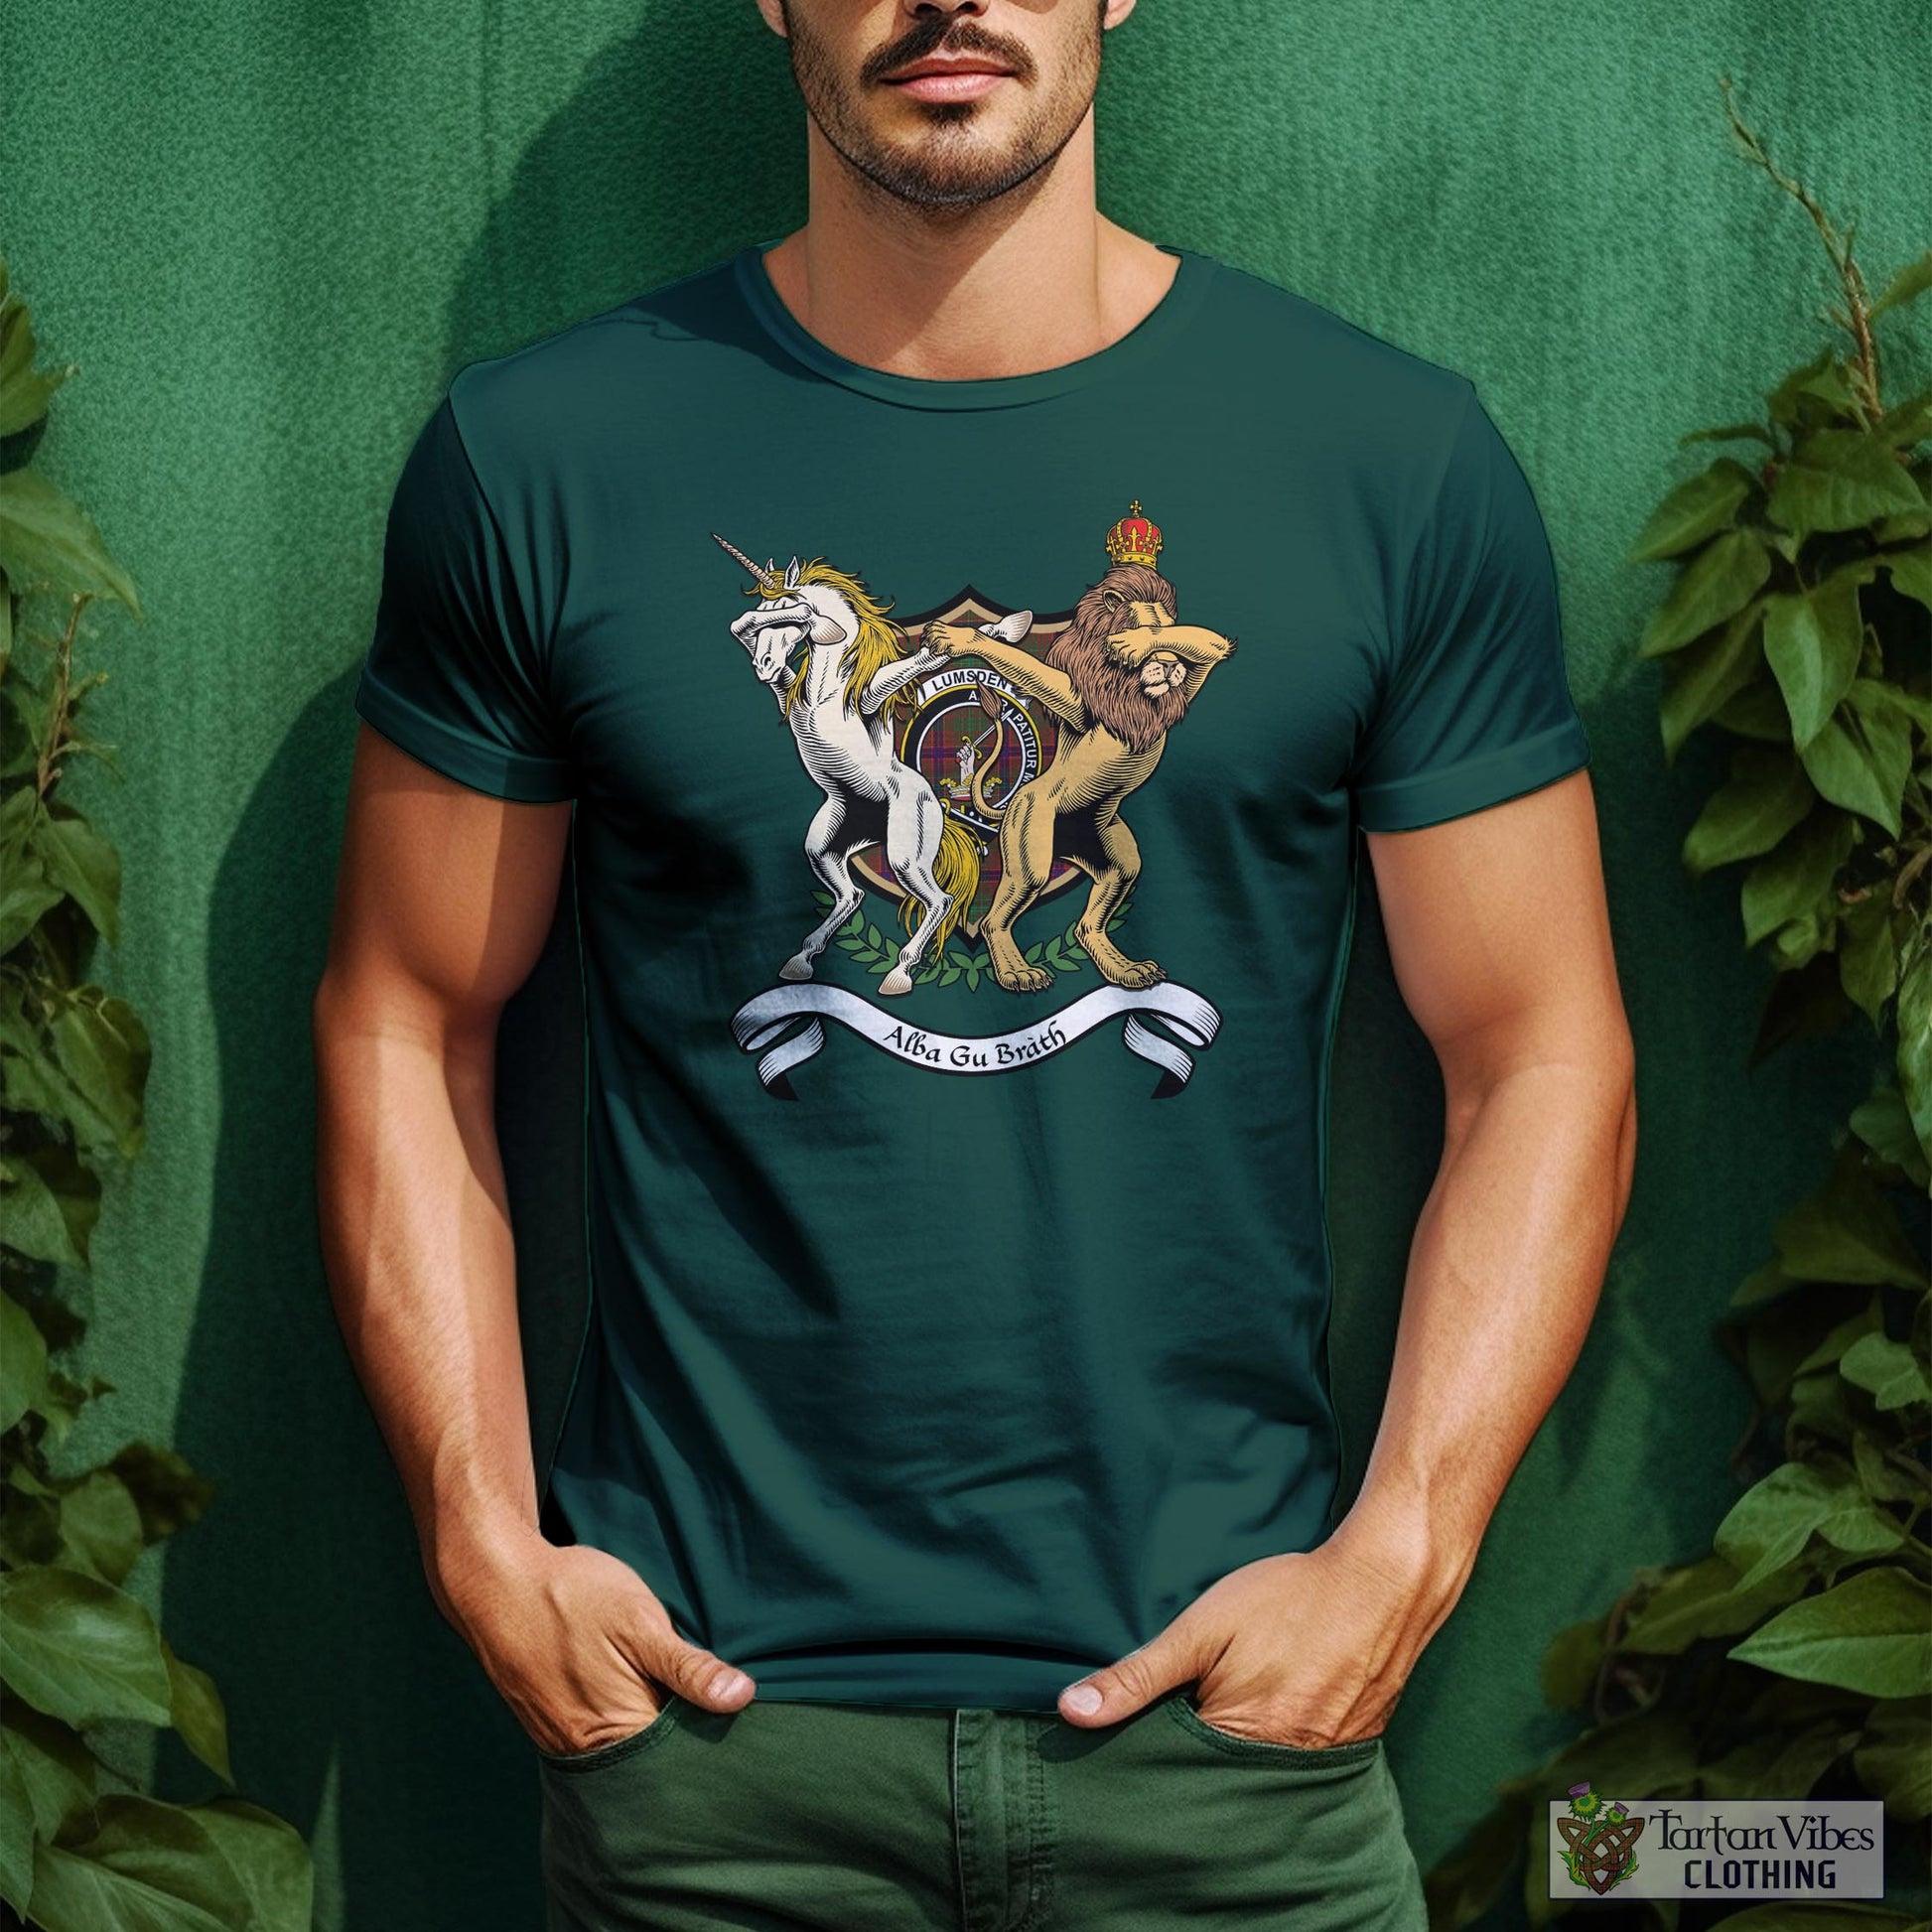 Tartan Vibes Clothing Lumsden Family Crest Cotton Men's T-Shirt with Scotland Royal Coat Of Arm Funny Style